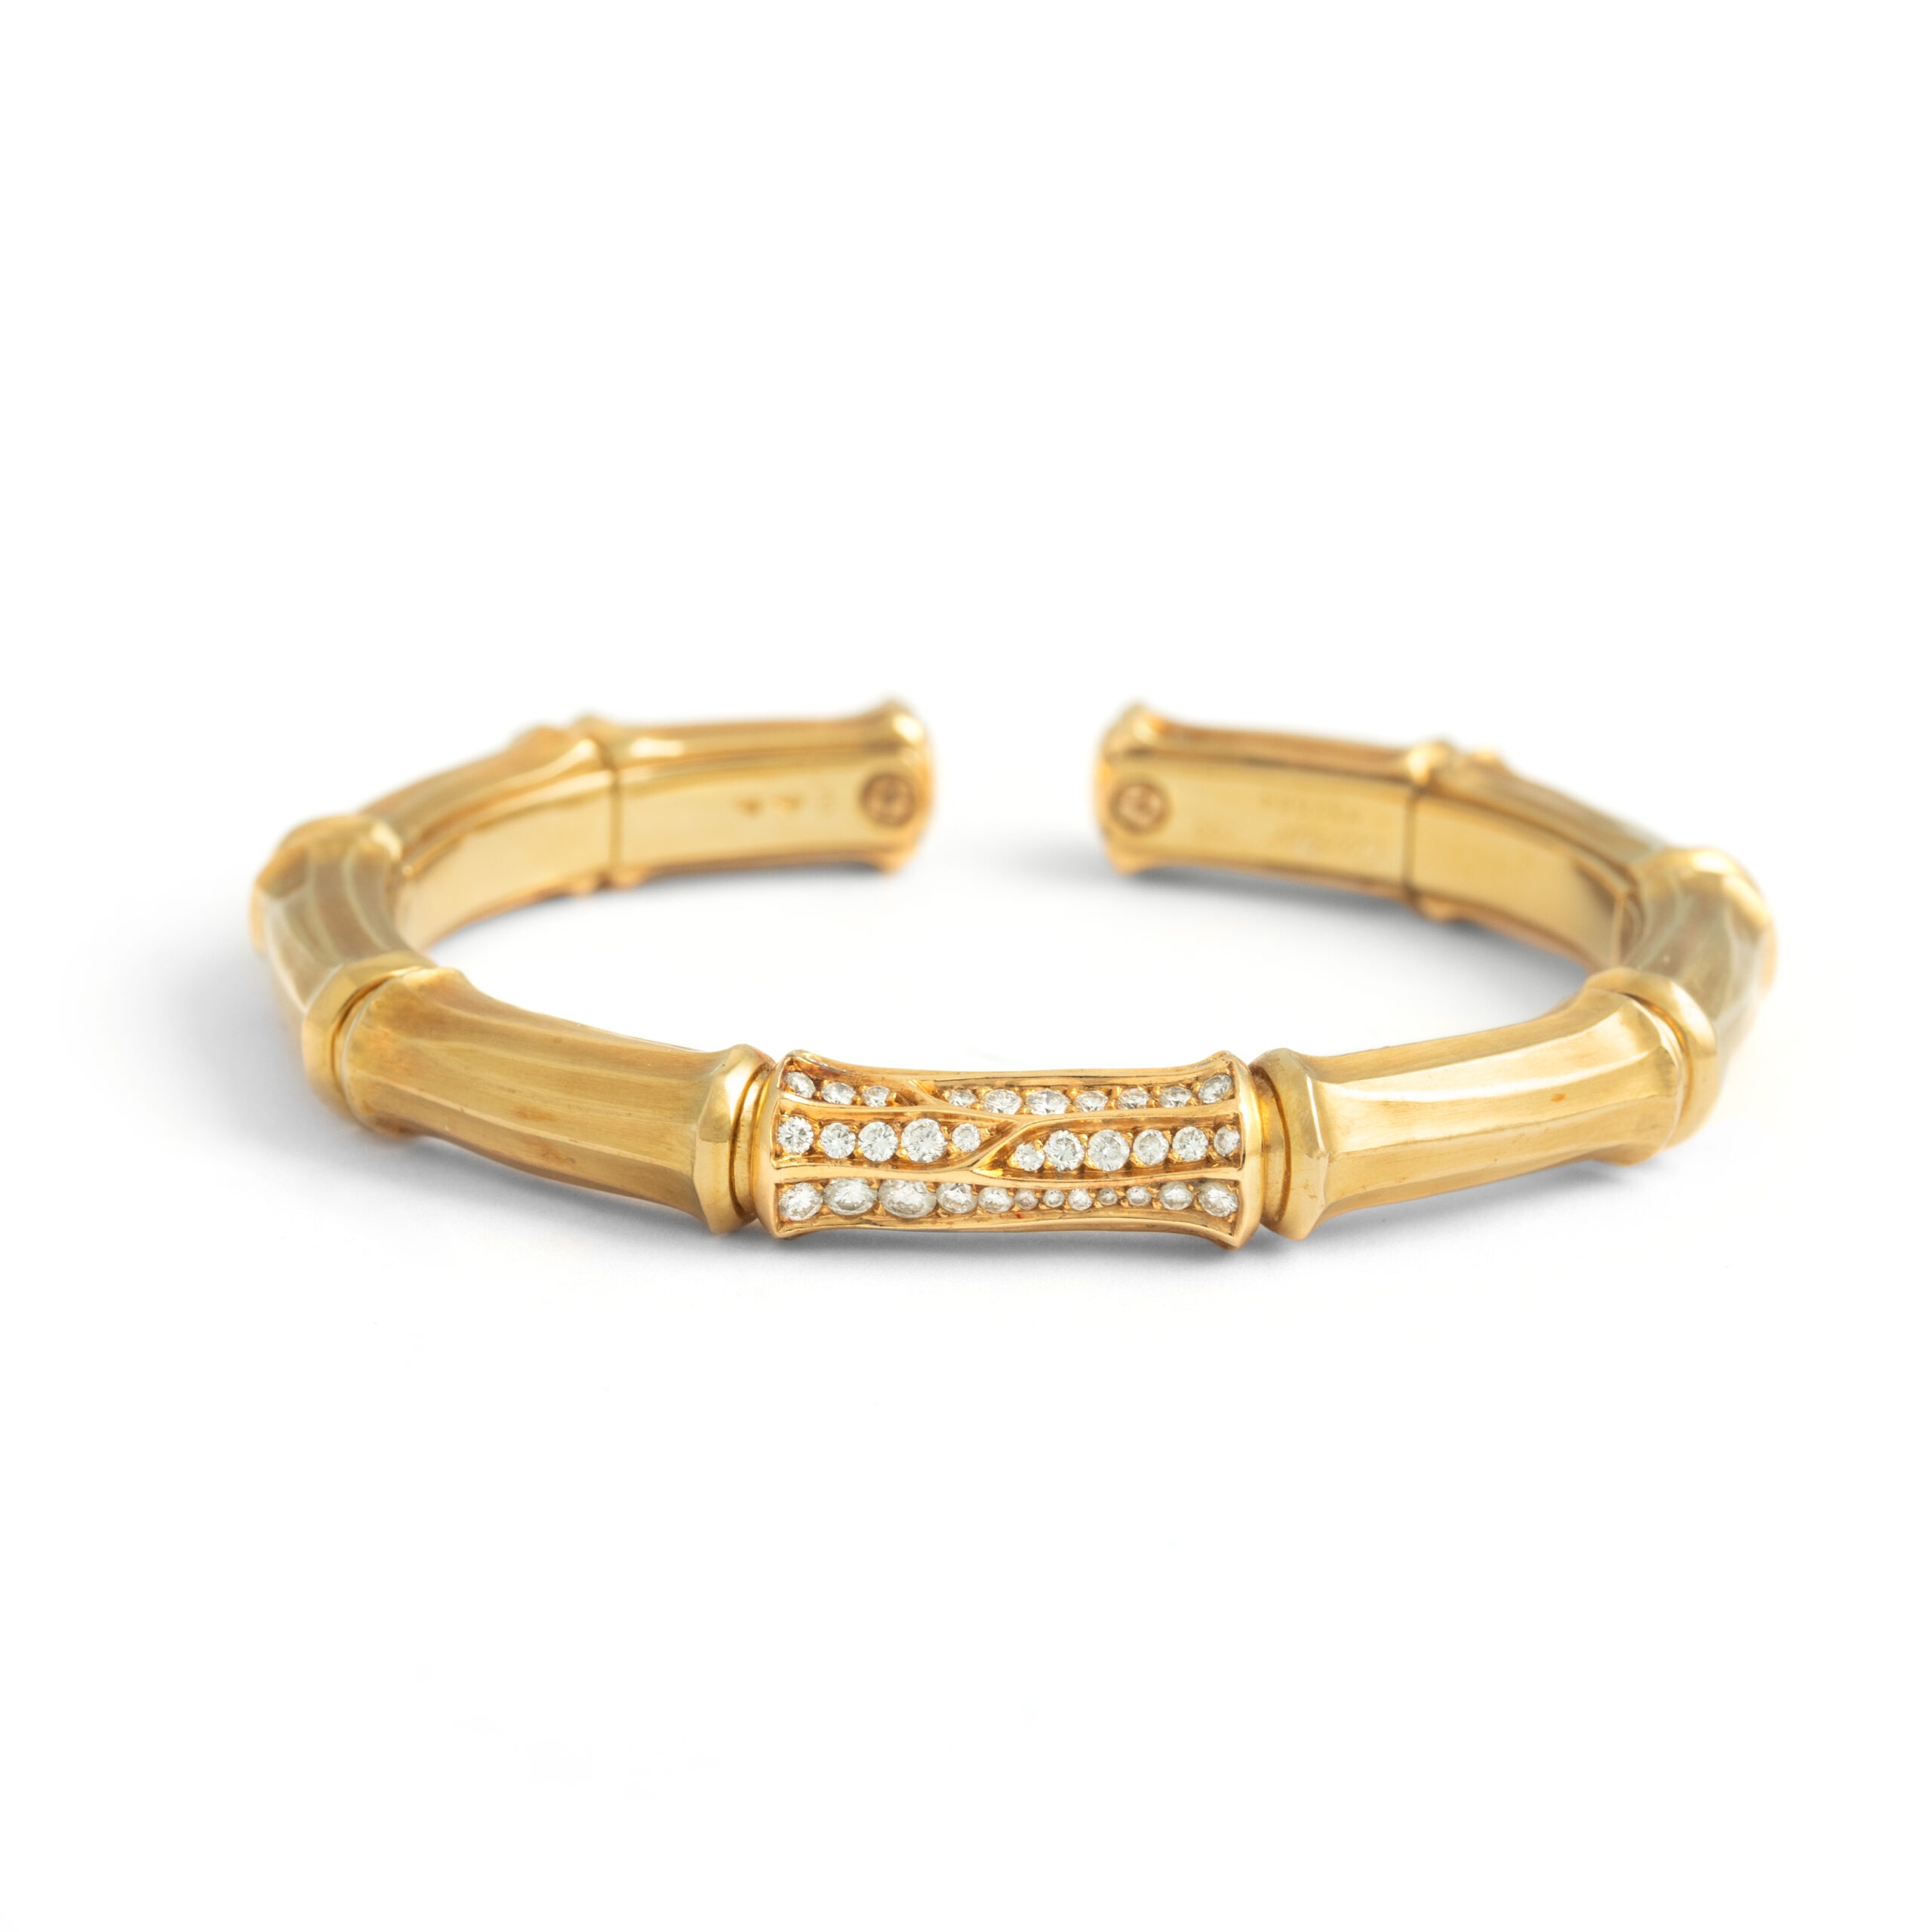 Front view of the Cartier Bangle Bamboo. The bracelet has a bamboo structure and looks as if it has 9 bamboo elements, the middle one is set with diamonds